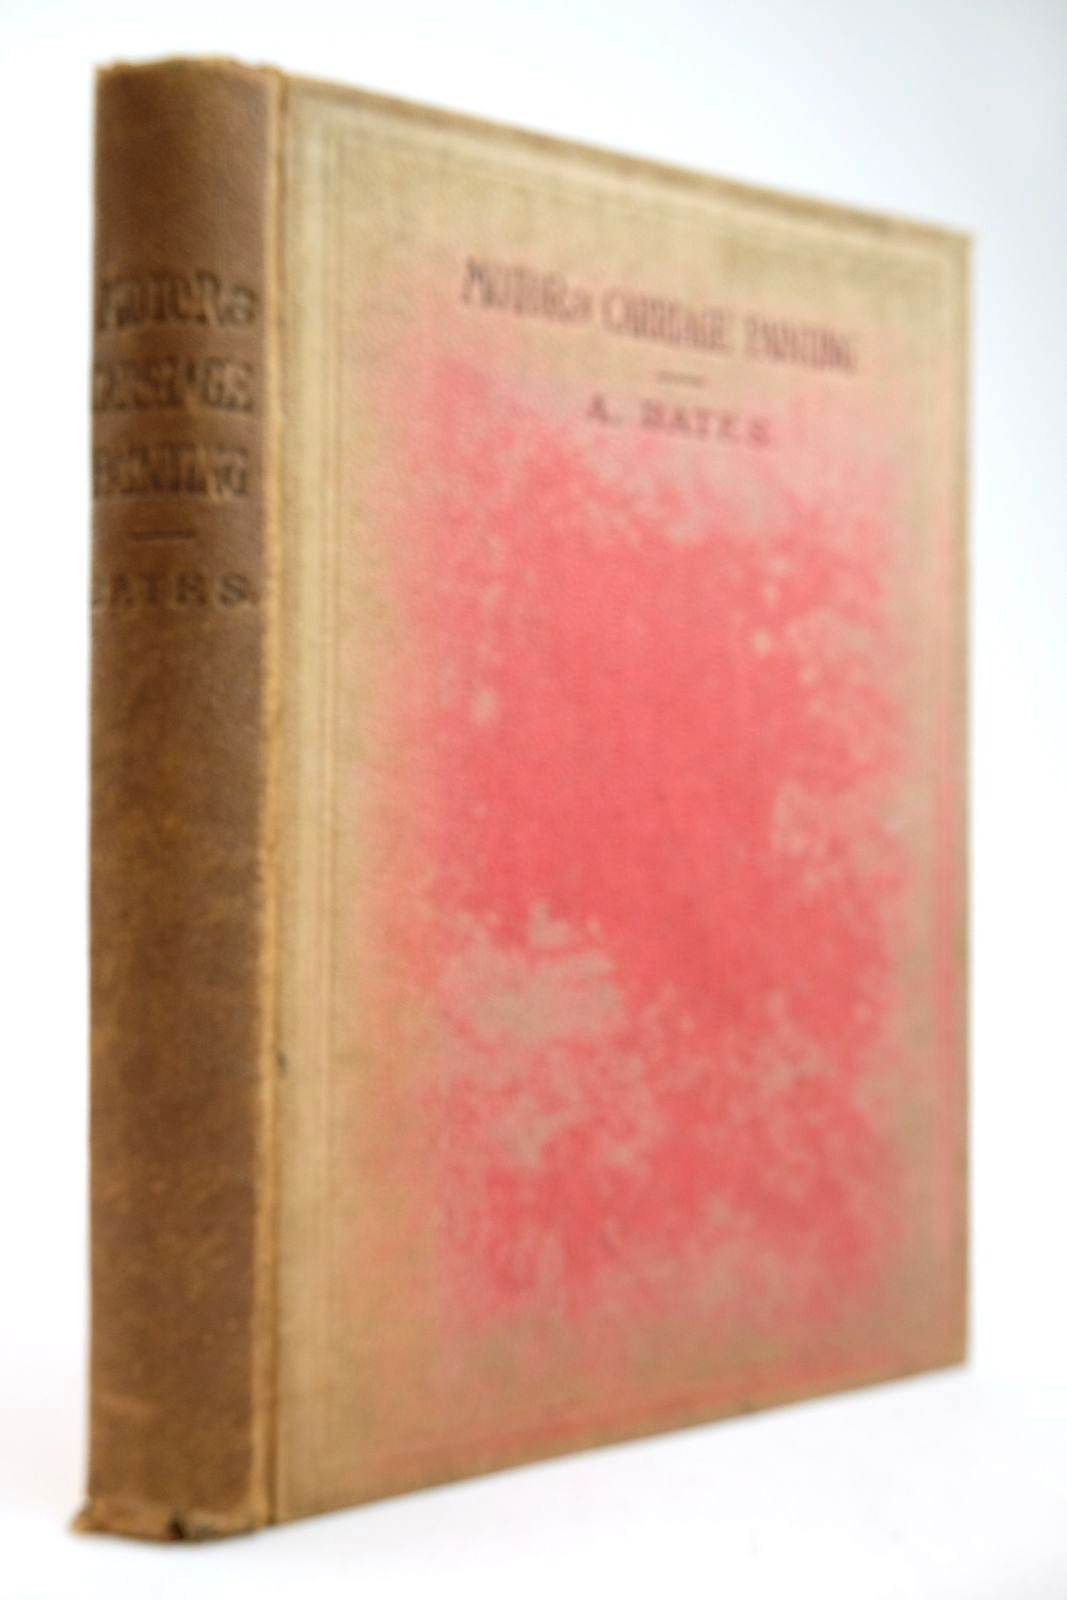 Photo of MOTOR AND CARRIAGE PAINTING: A PRACTICAL MANUAL written by Bates, A. published by The Trade Papers Publishing Co. Ltd. (STOCK CODE: 2133367)  for sale by Stella & Rose's Books